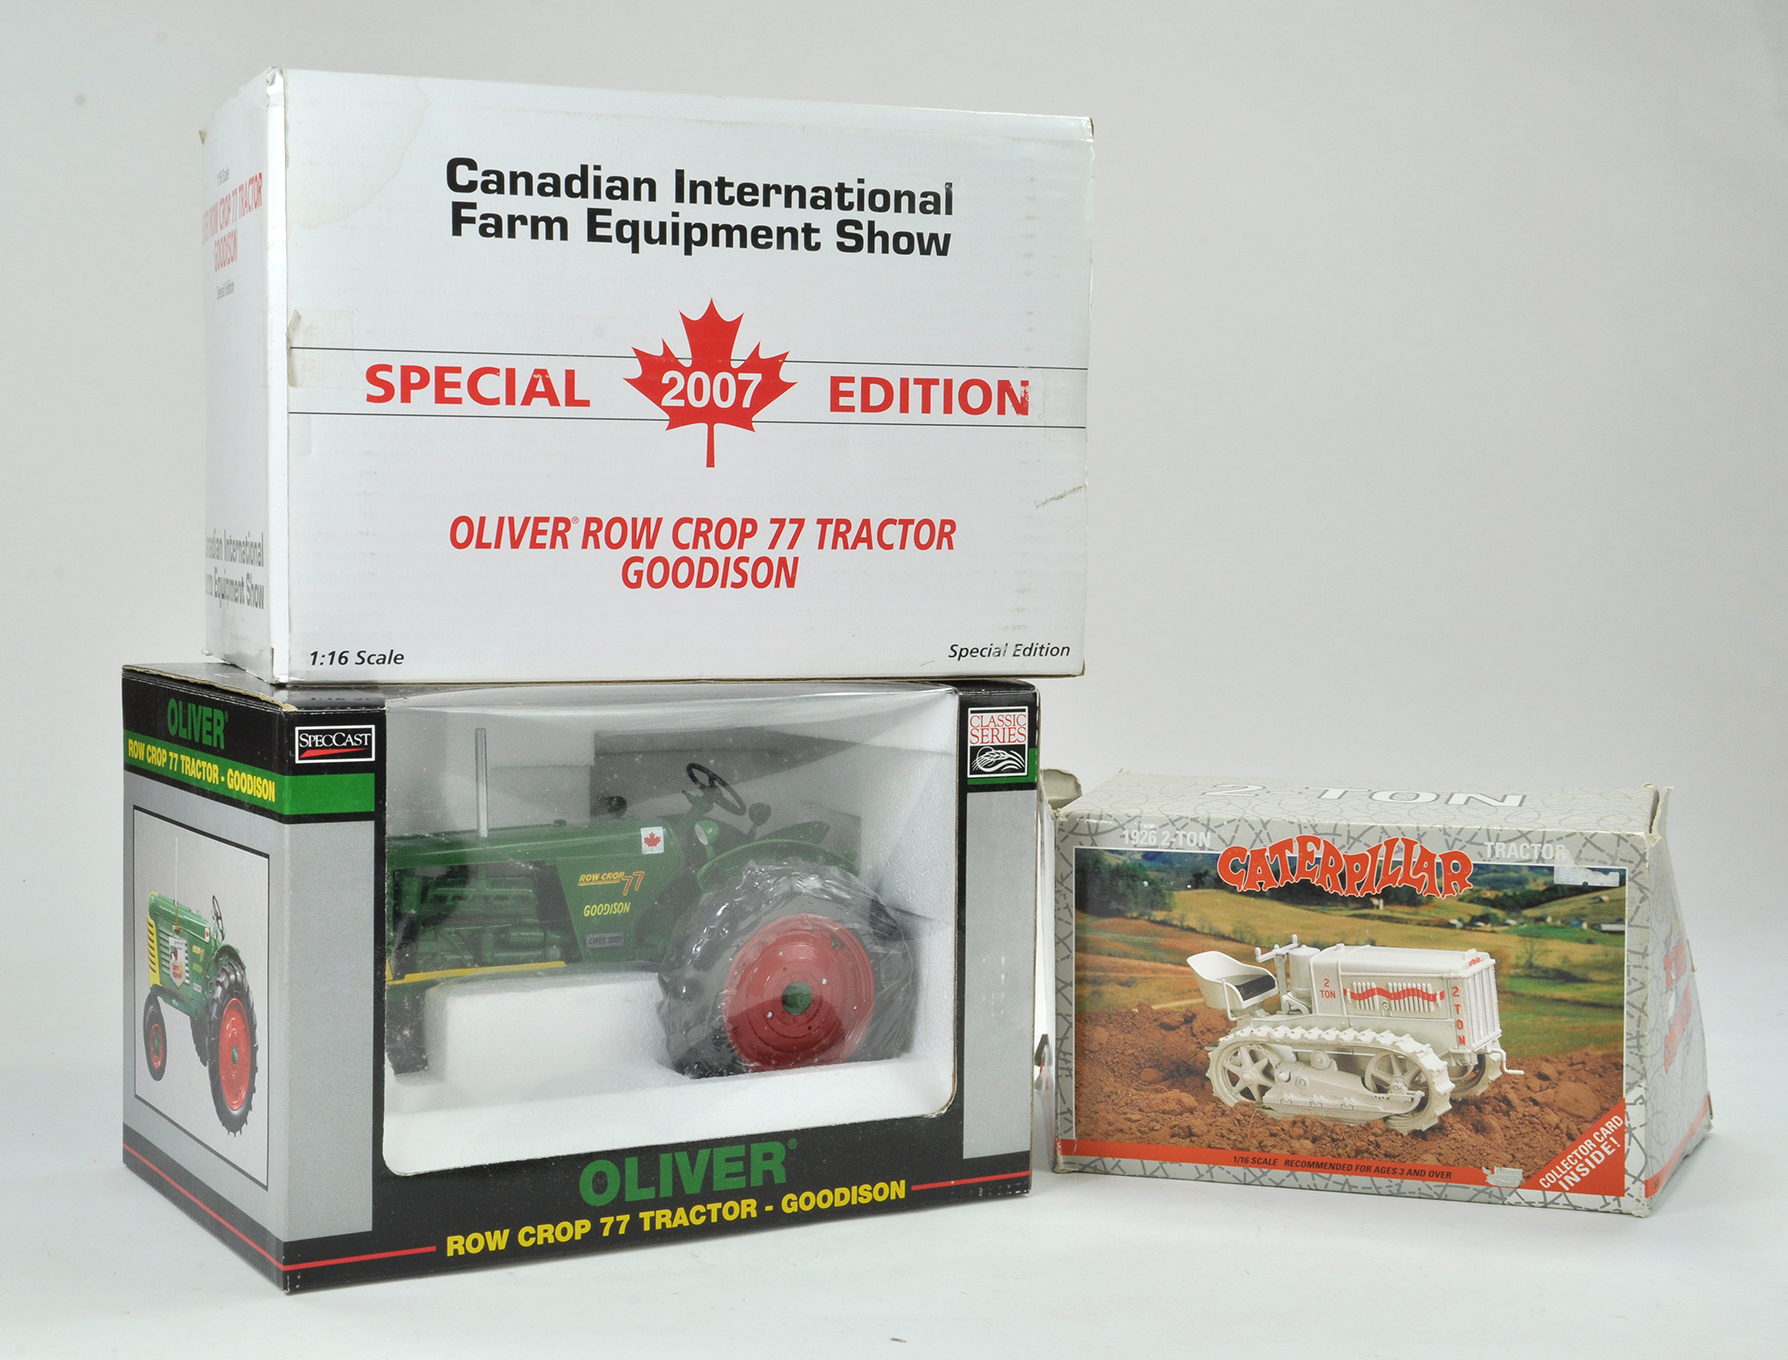 Spec Cast 1/16 farm issue comprising Oliver Row Crop 77 Tractor for Canadian Farm Show 07 plus